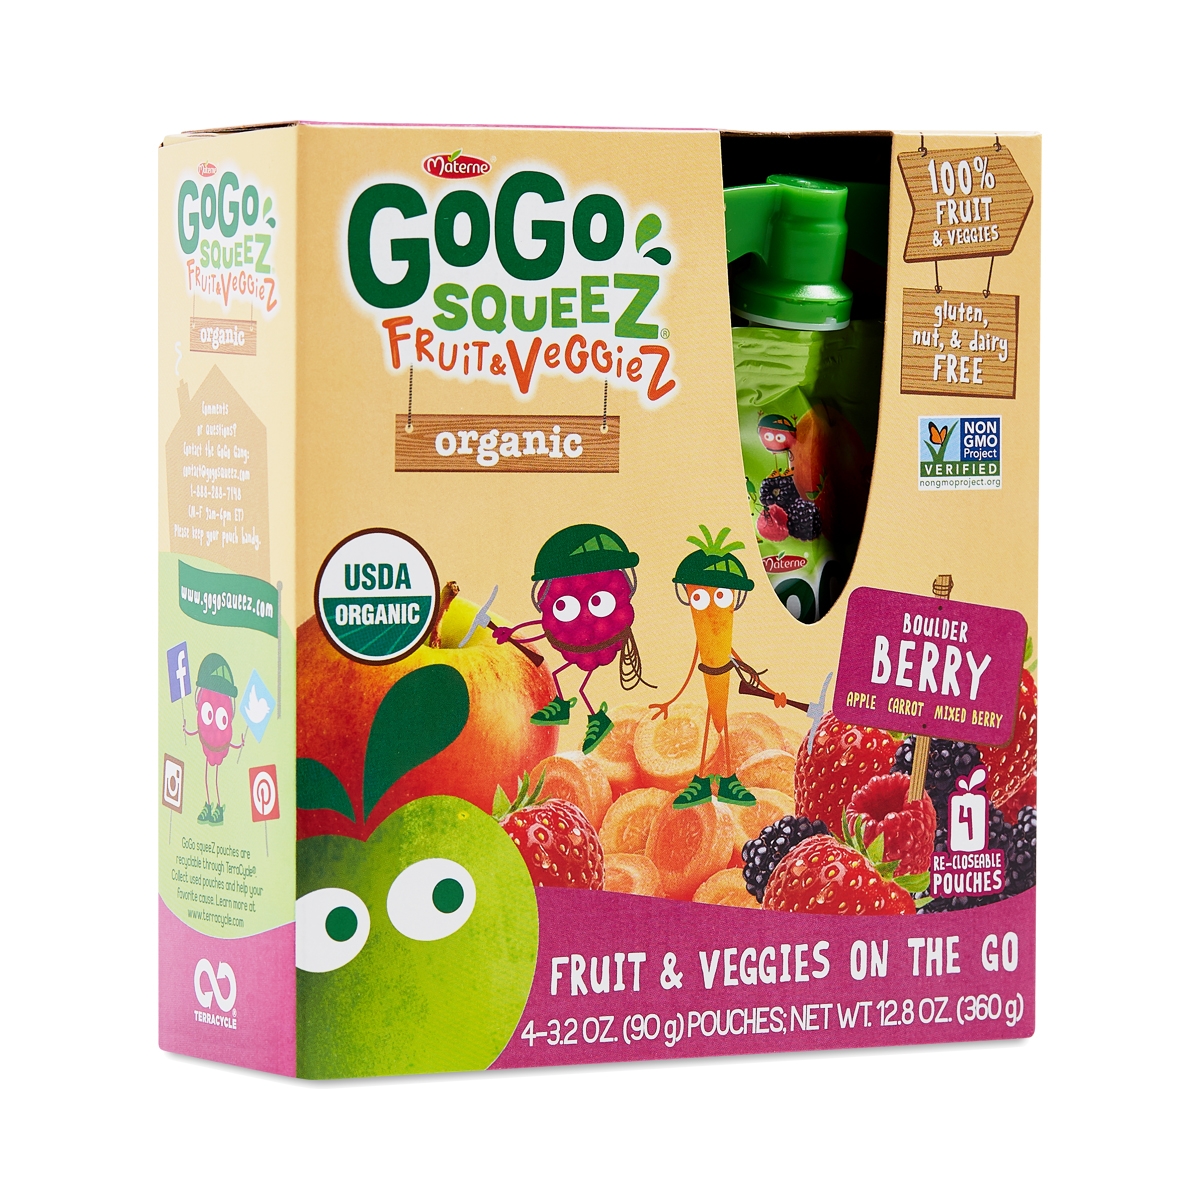 Materne Materne, Gogo Squeez, Fruit & Veggies On The Go Pouches, Boulder Berry Food Product Image